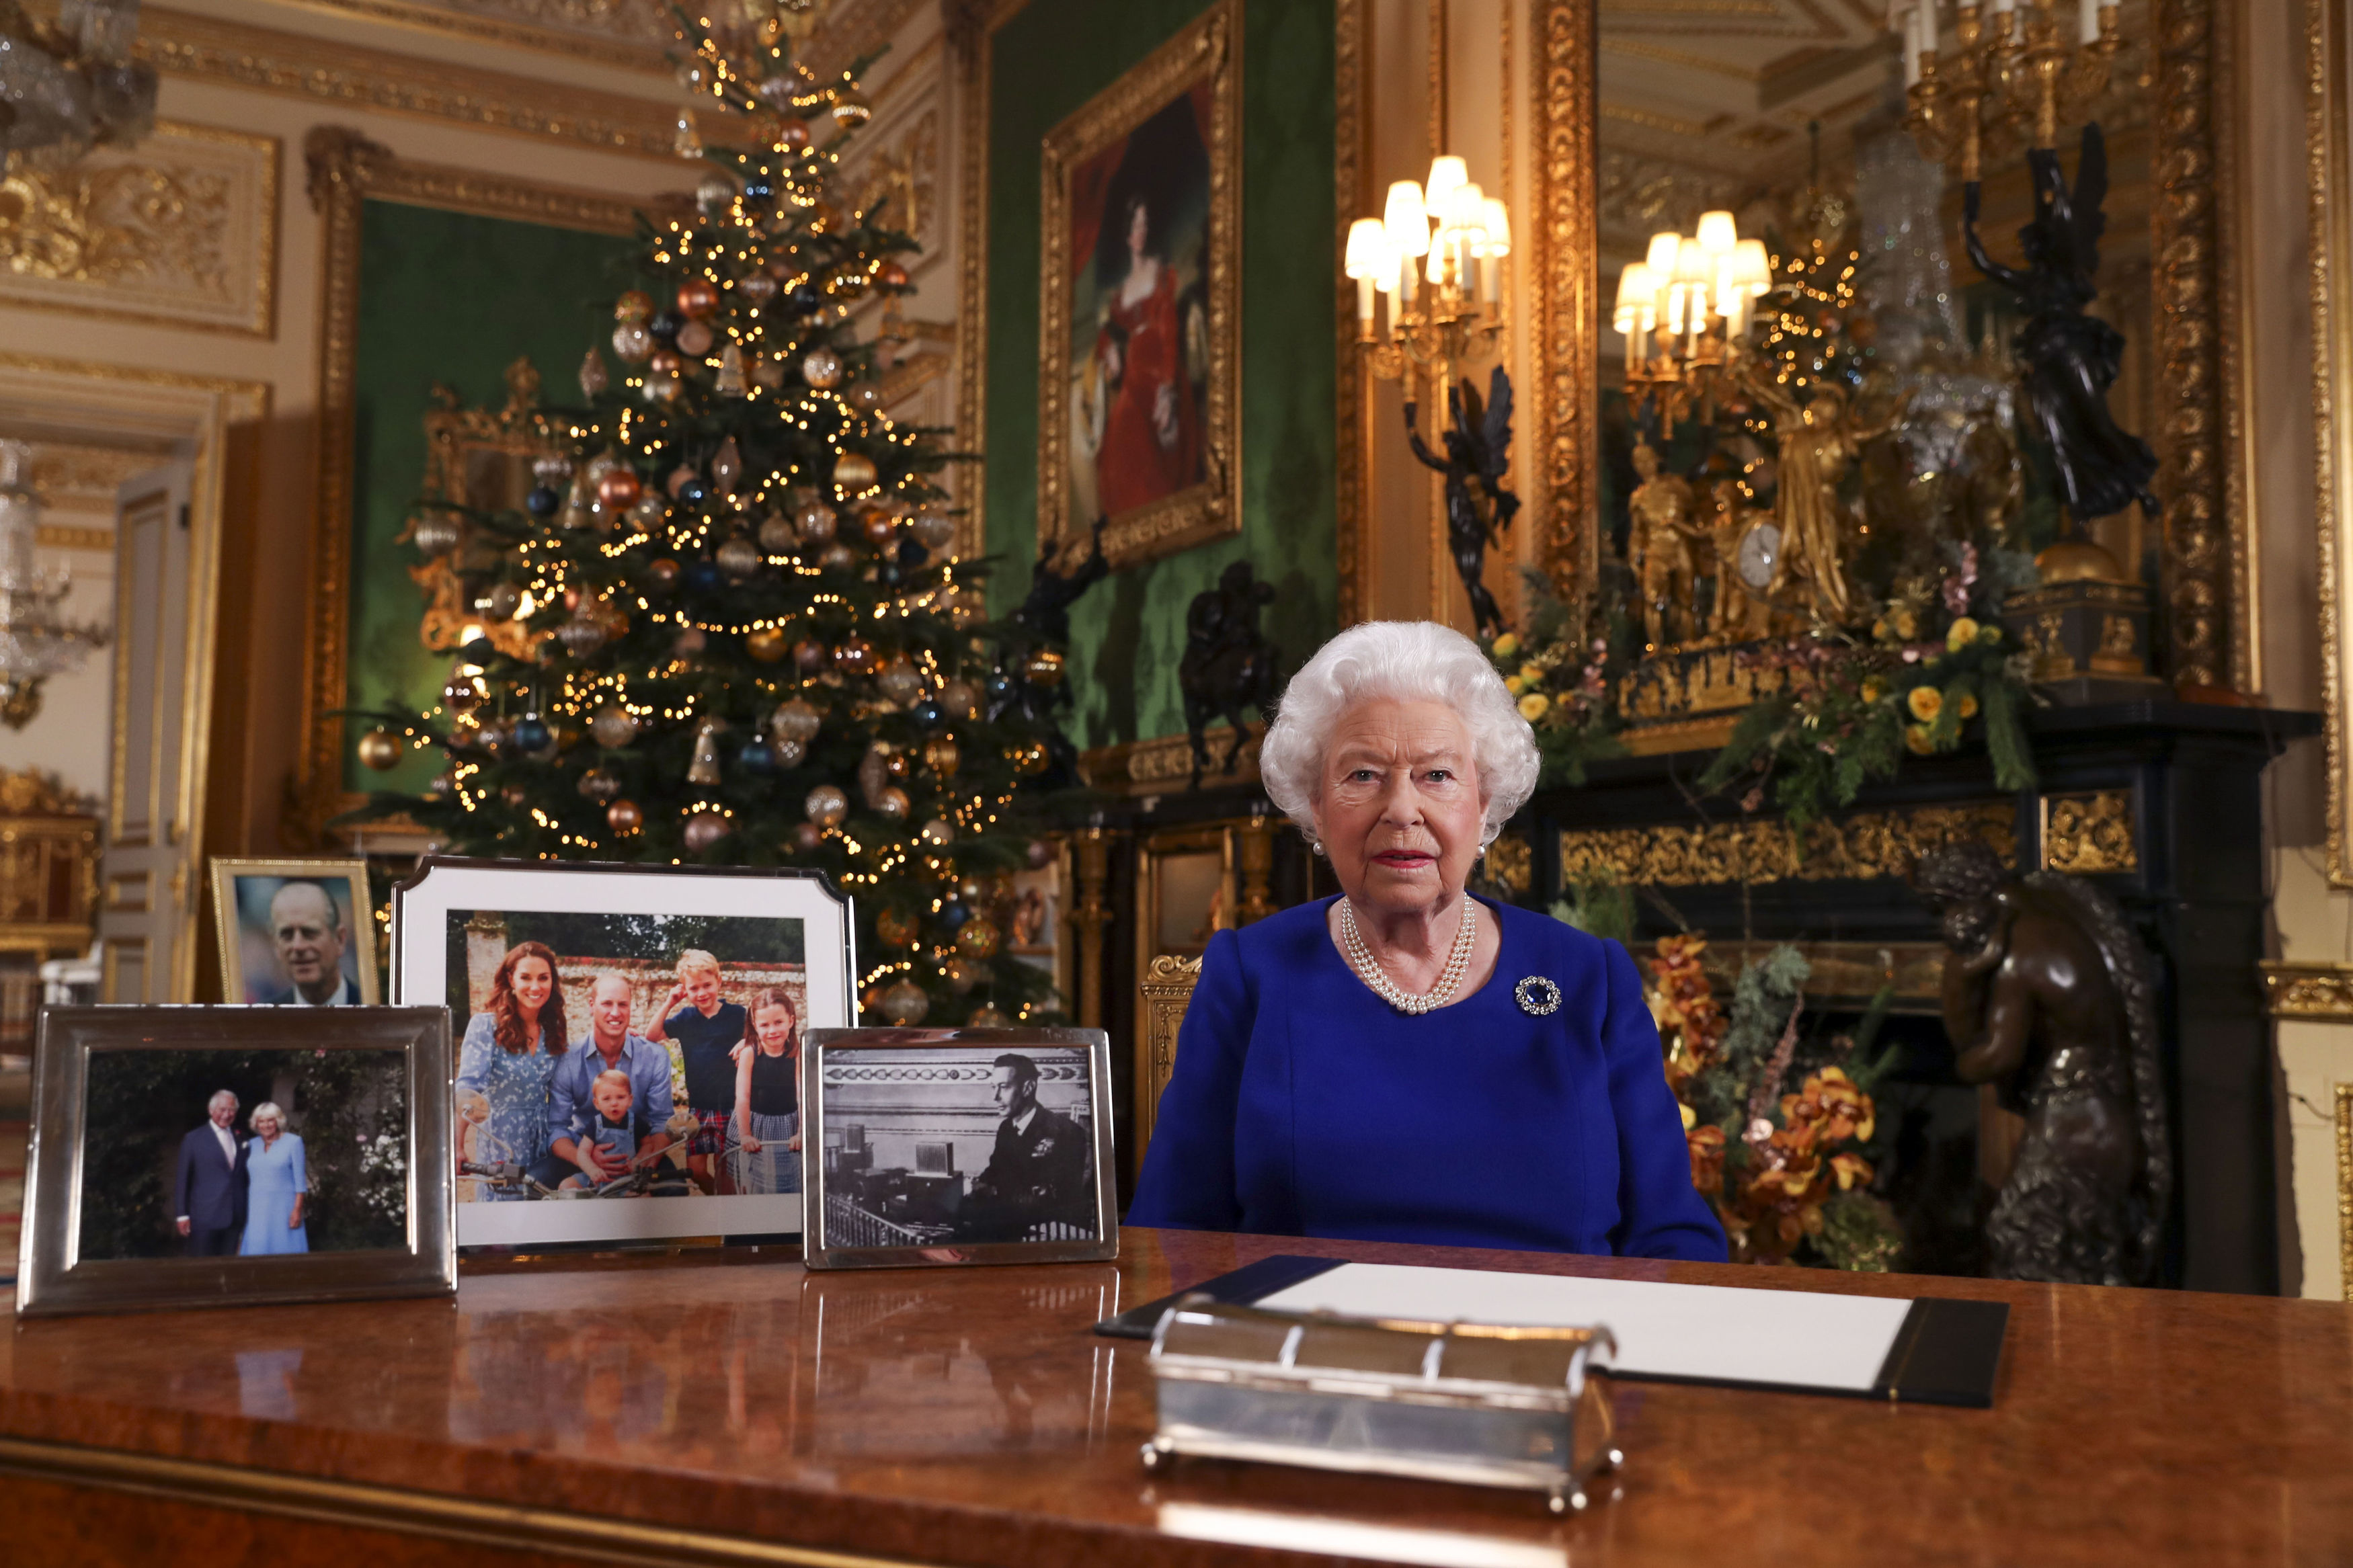 The Queen of England sitting at a table with a Christmas tree behind her.